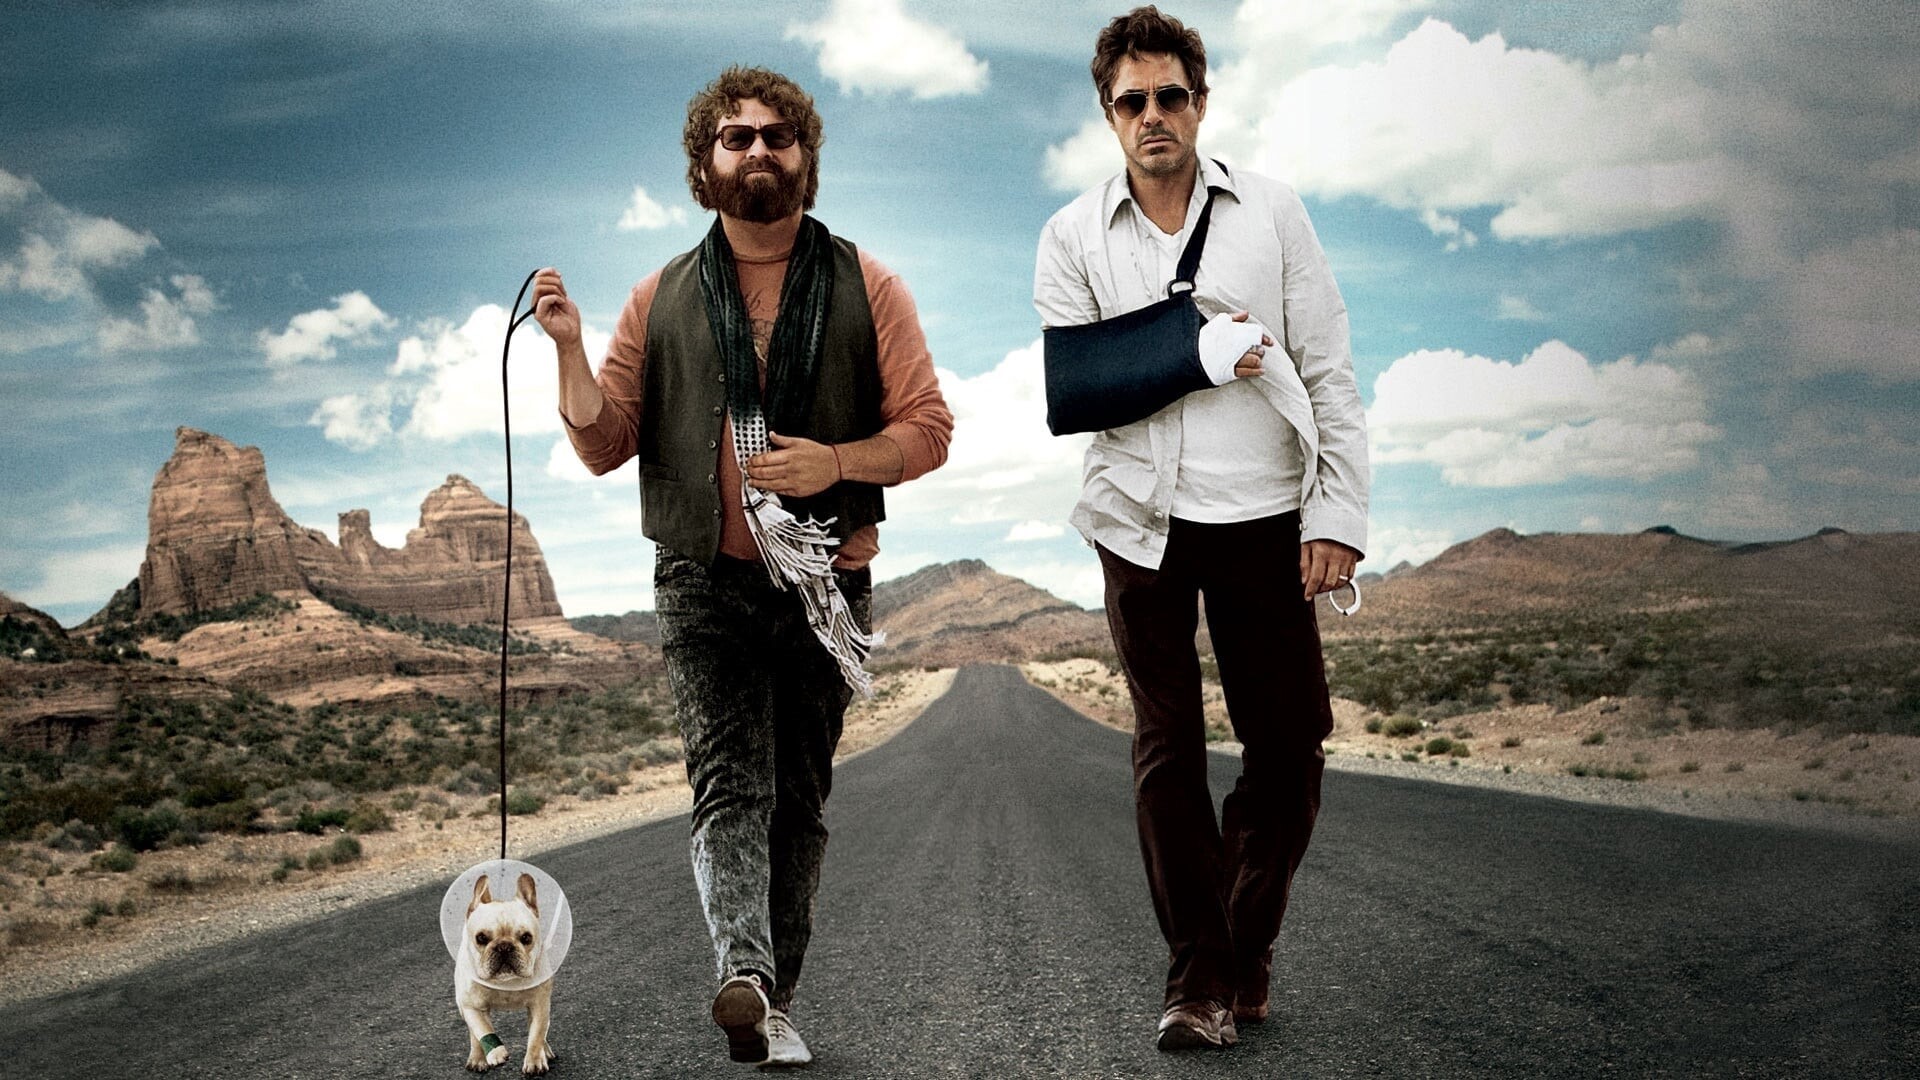 Due Date (Movie 2010): Peter Highman, A successful architect, Road-trip with an aspiring actor, Zach Galifianakis. 1920x1080 Full HD Background.